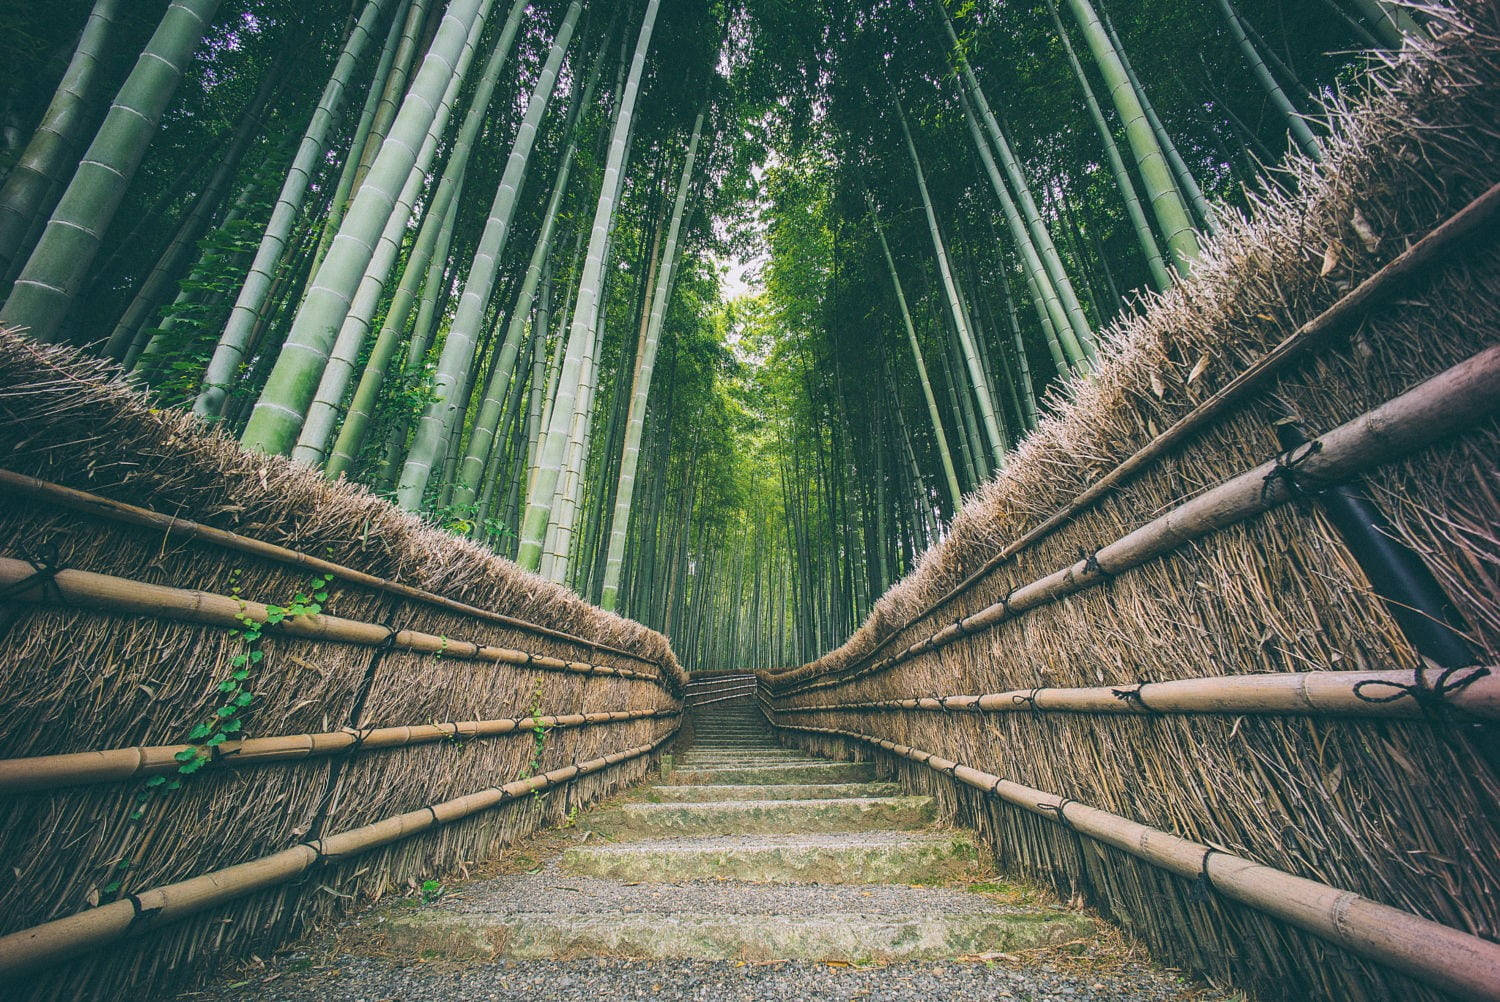 Majestic Bamboo Forest Scene Captured On Iphone Wallpaper